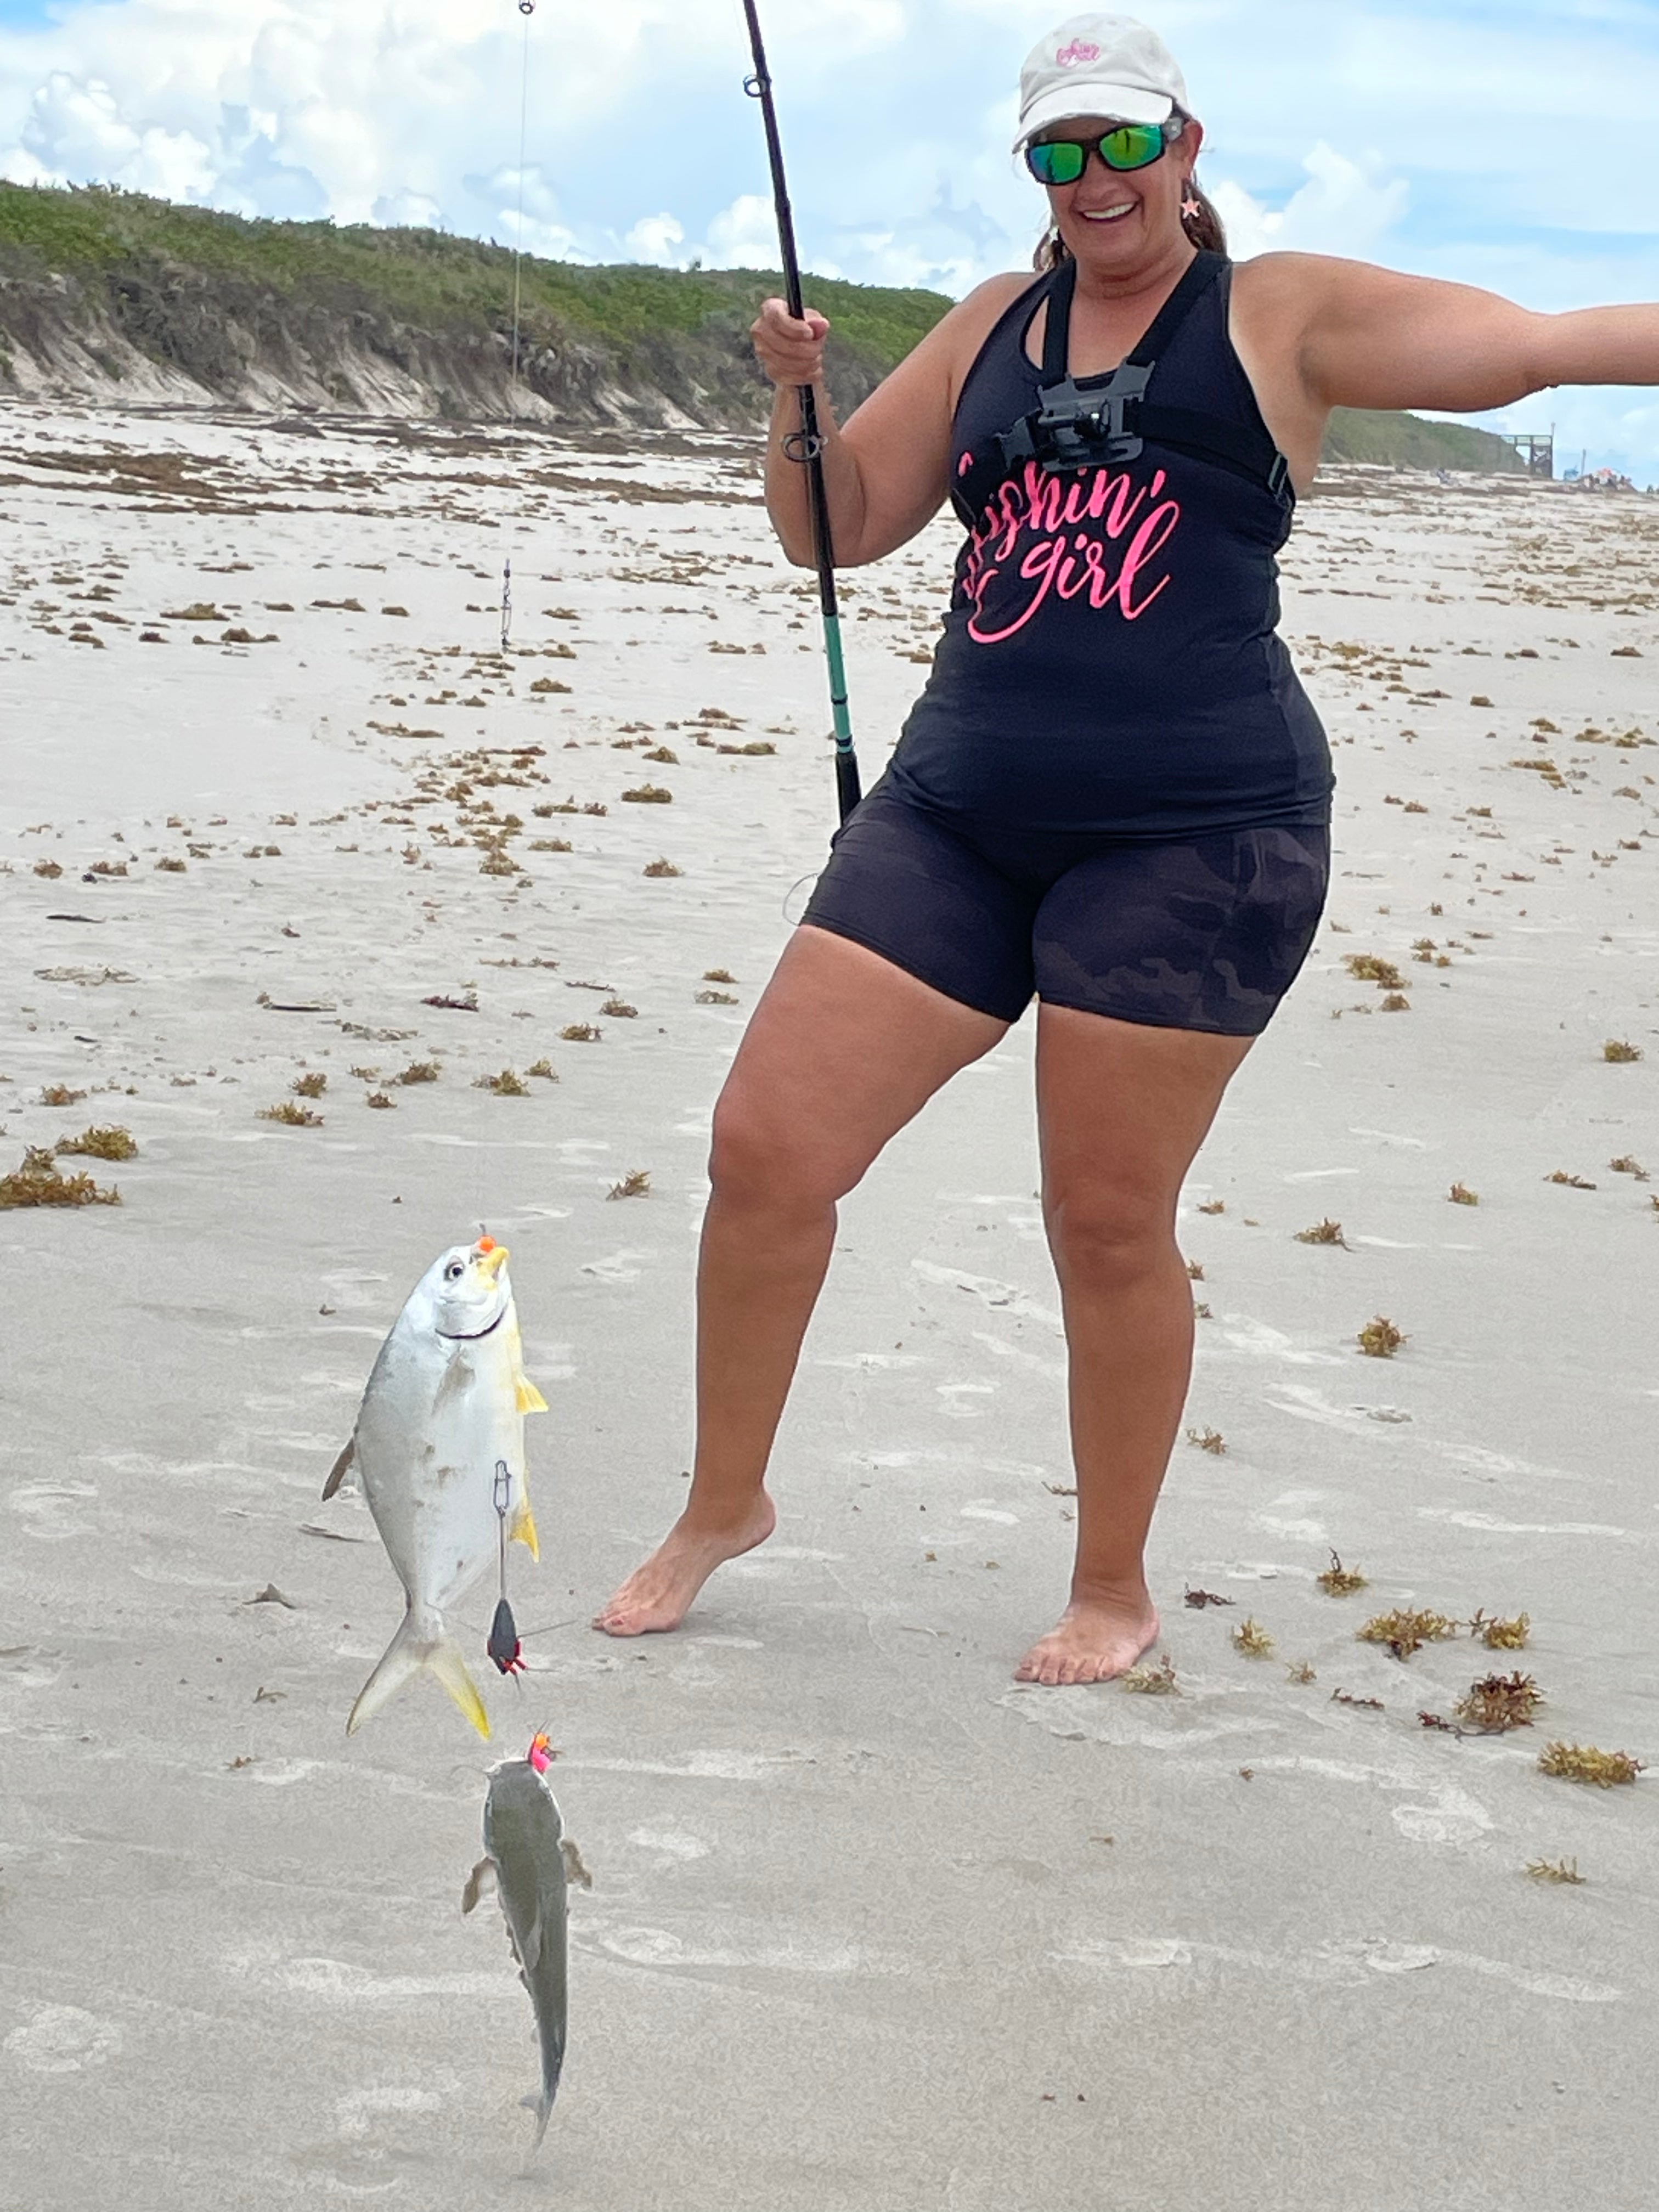 Fishin' Girl Pompano Rig for Surf Fishing * ONE RIG * 5 Color Options